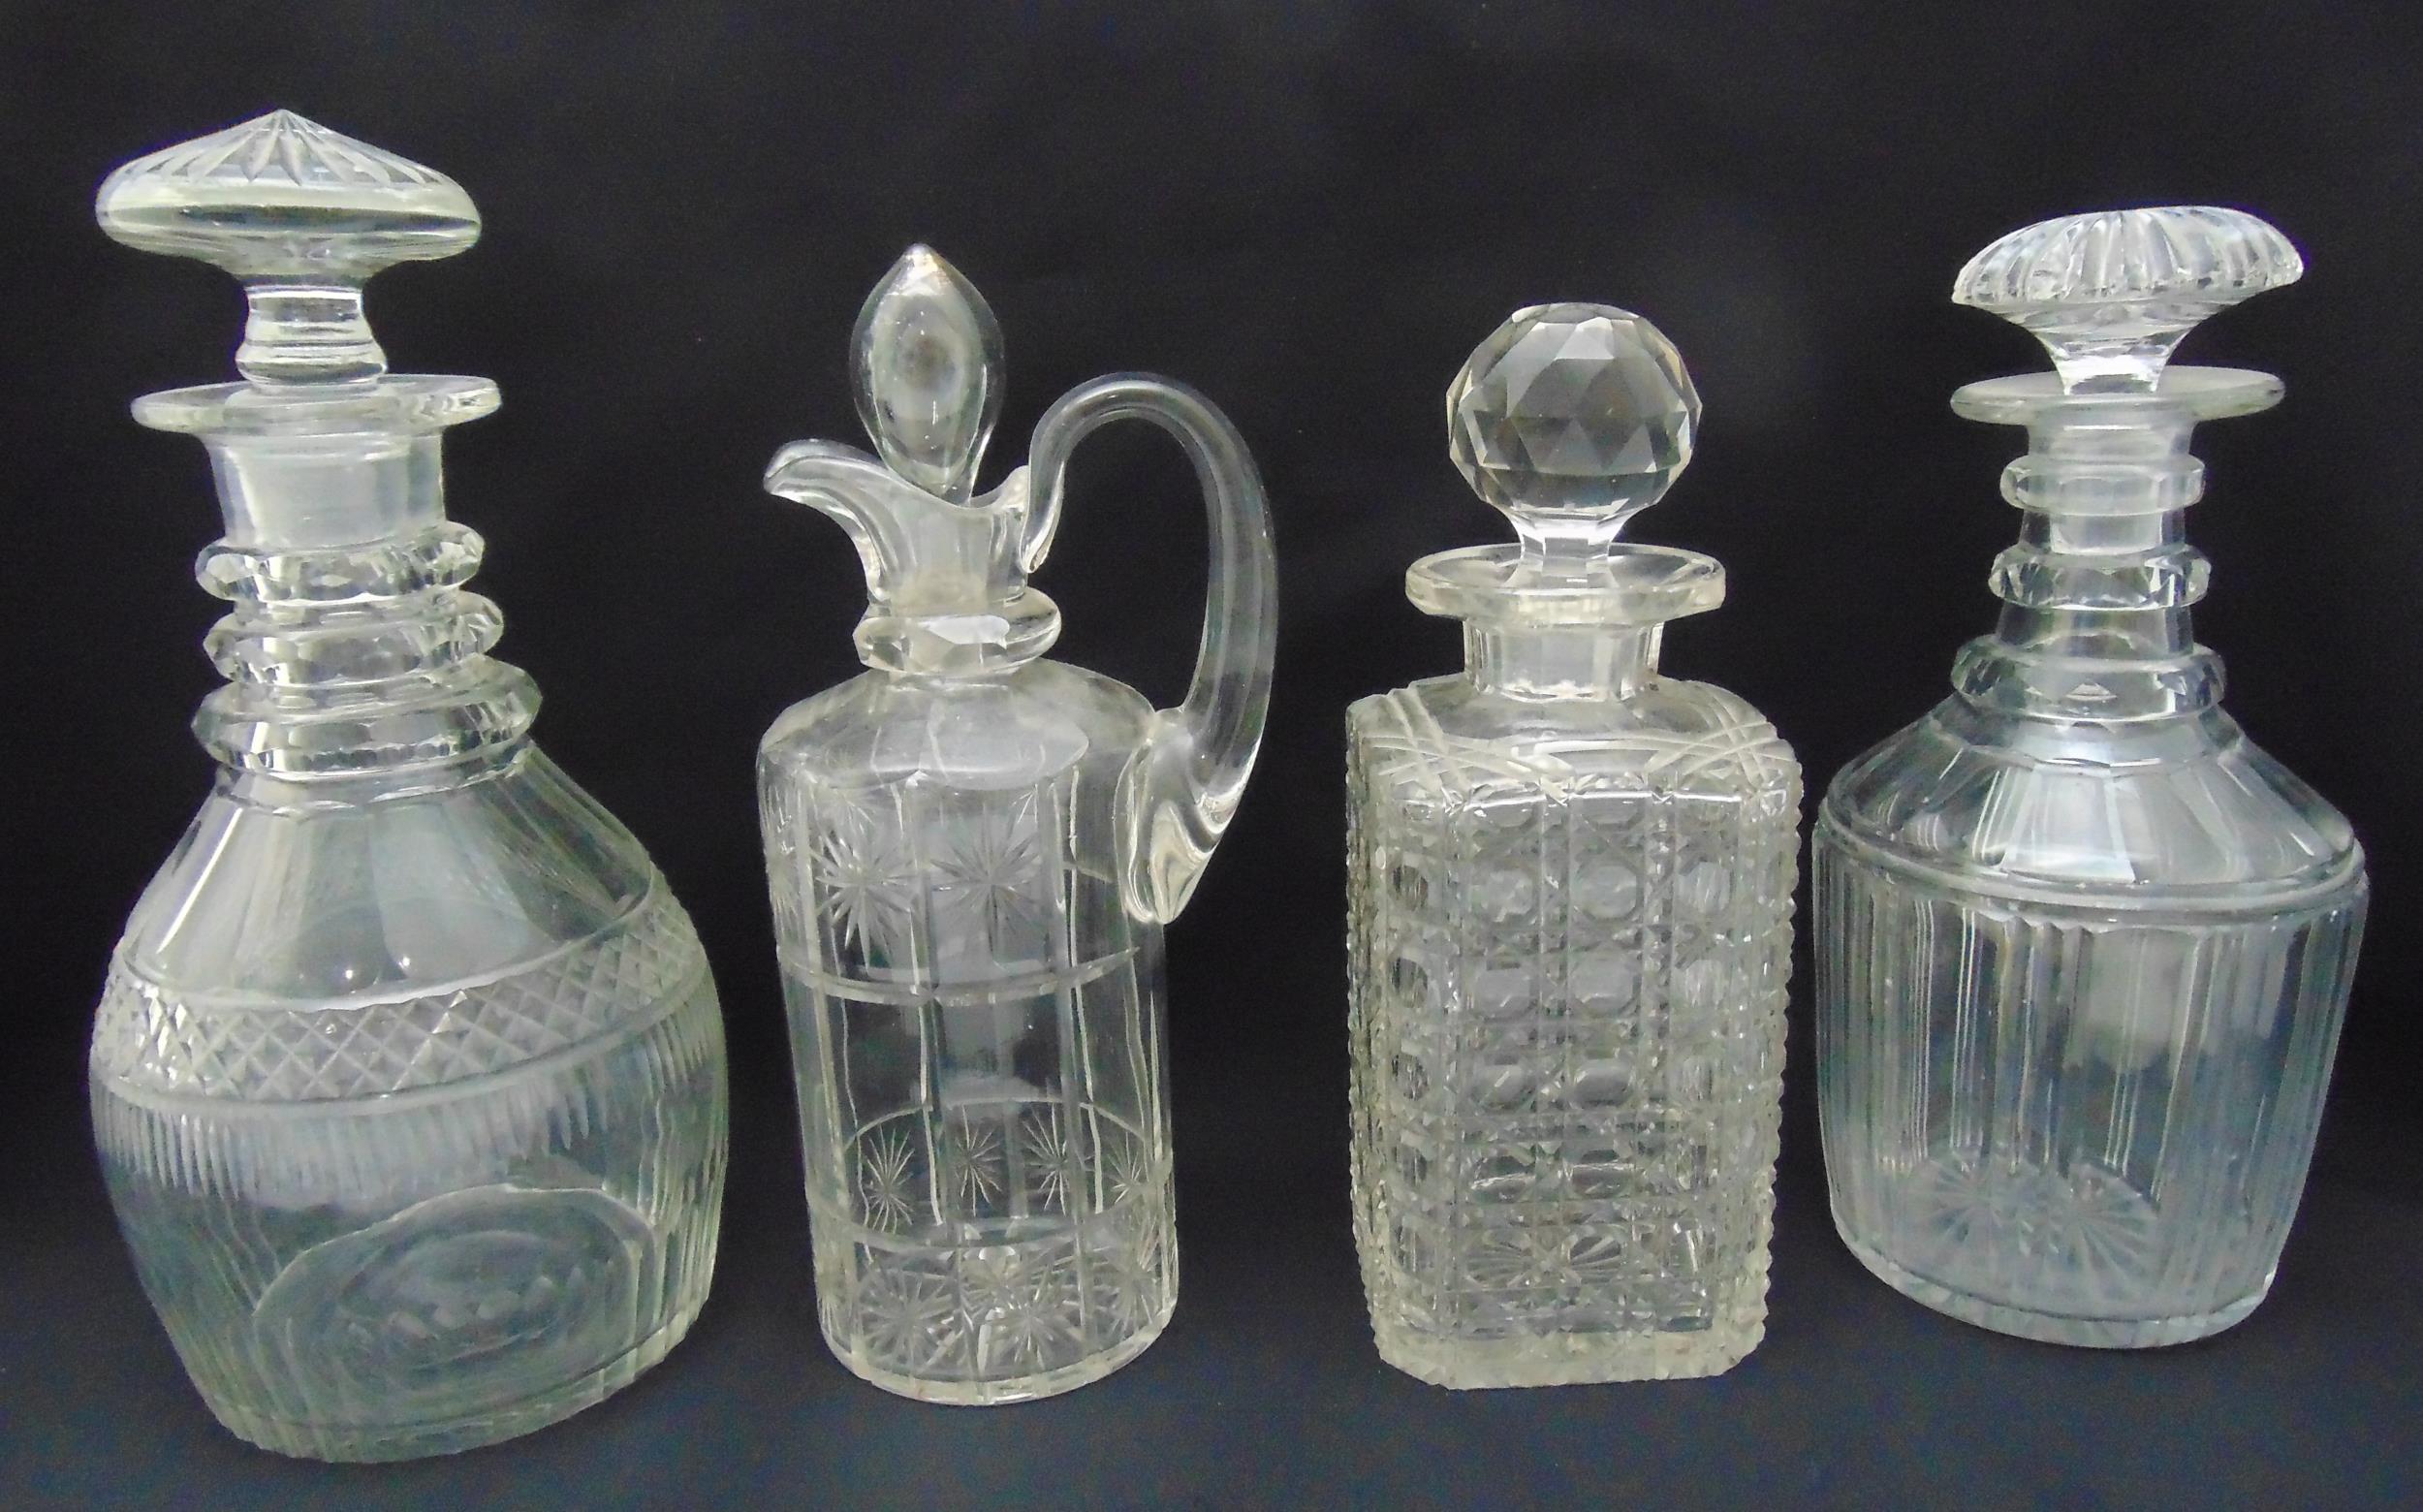 Four 19th century cut glass decanters of various shape and form with drop stoppers